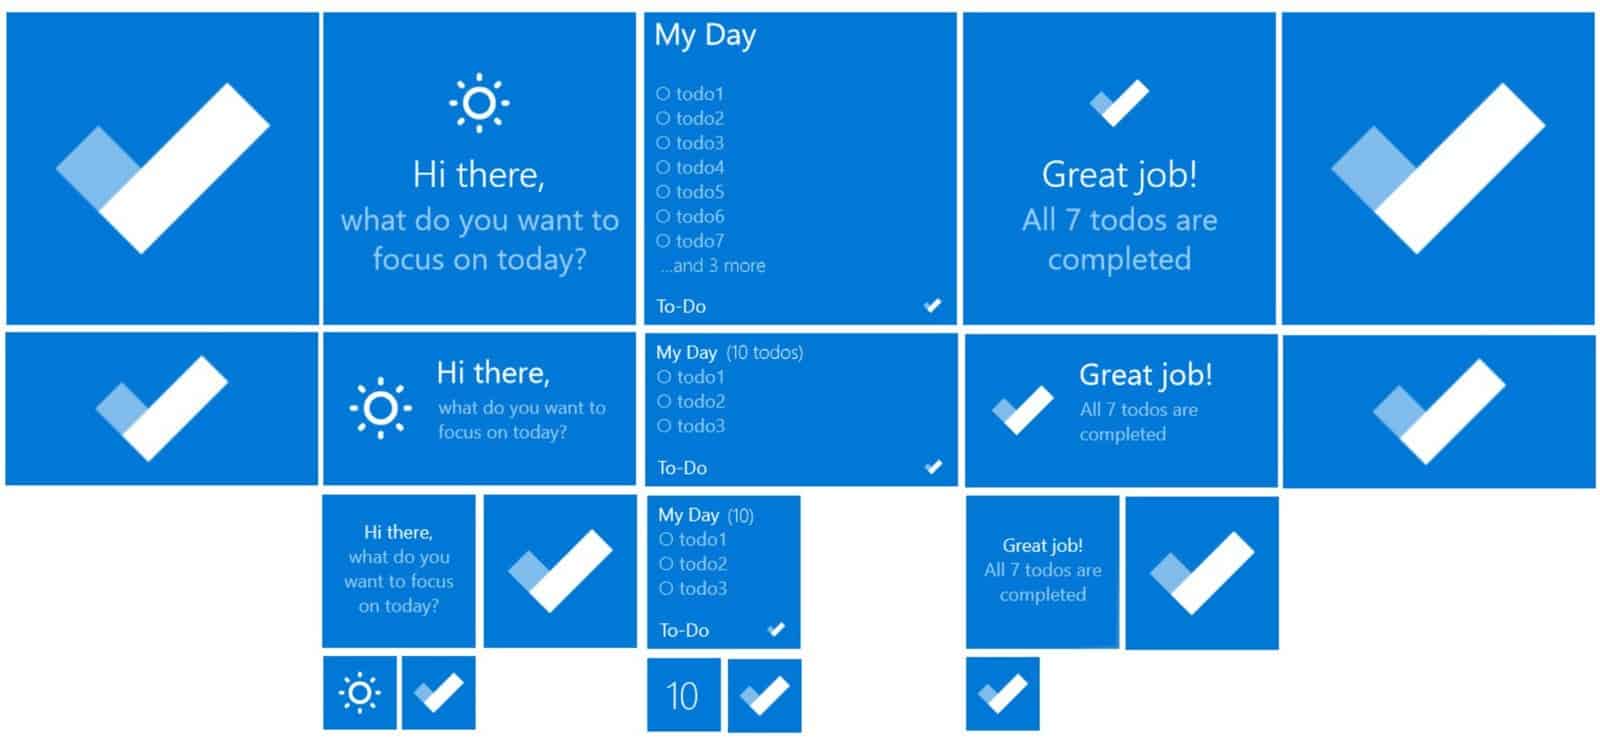 More Microsoft To-Do goodness as Insiders get background sync, Live Tiles - OnMSFT.com - September 12, 2018